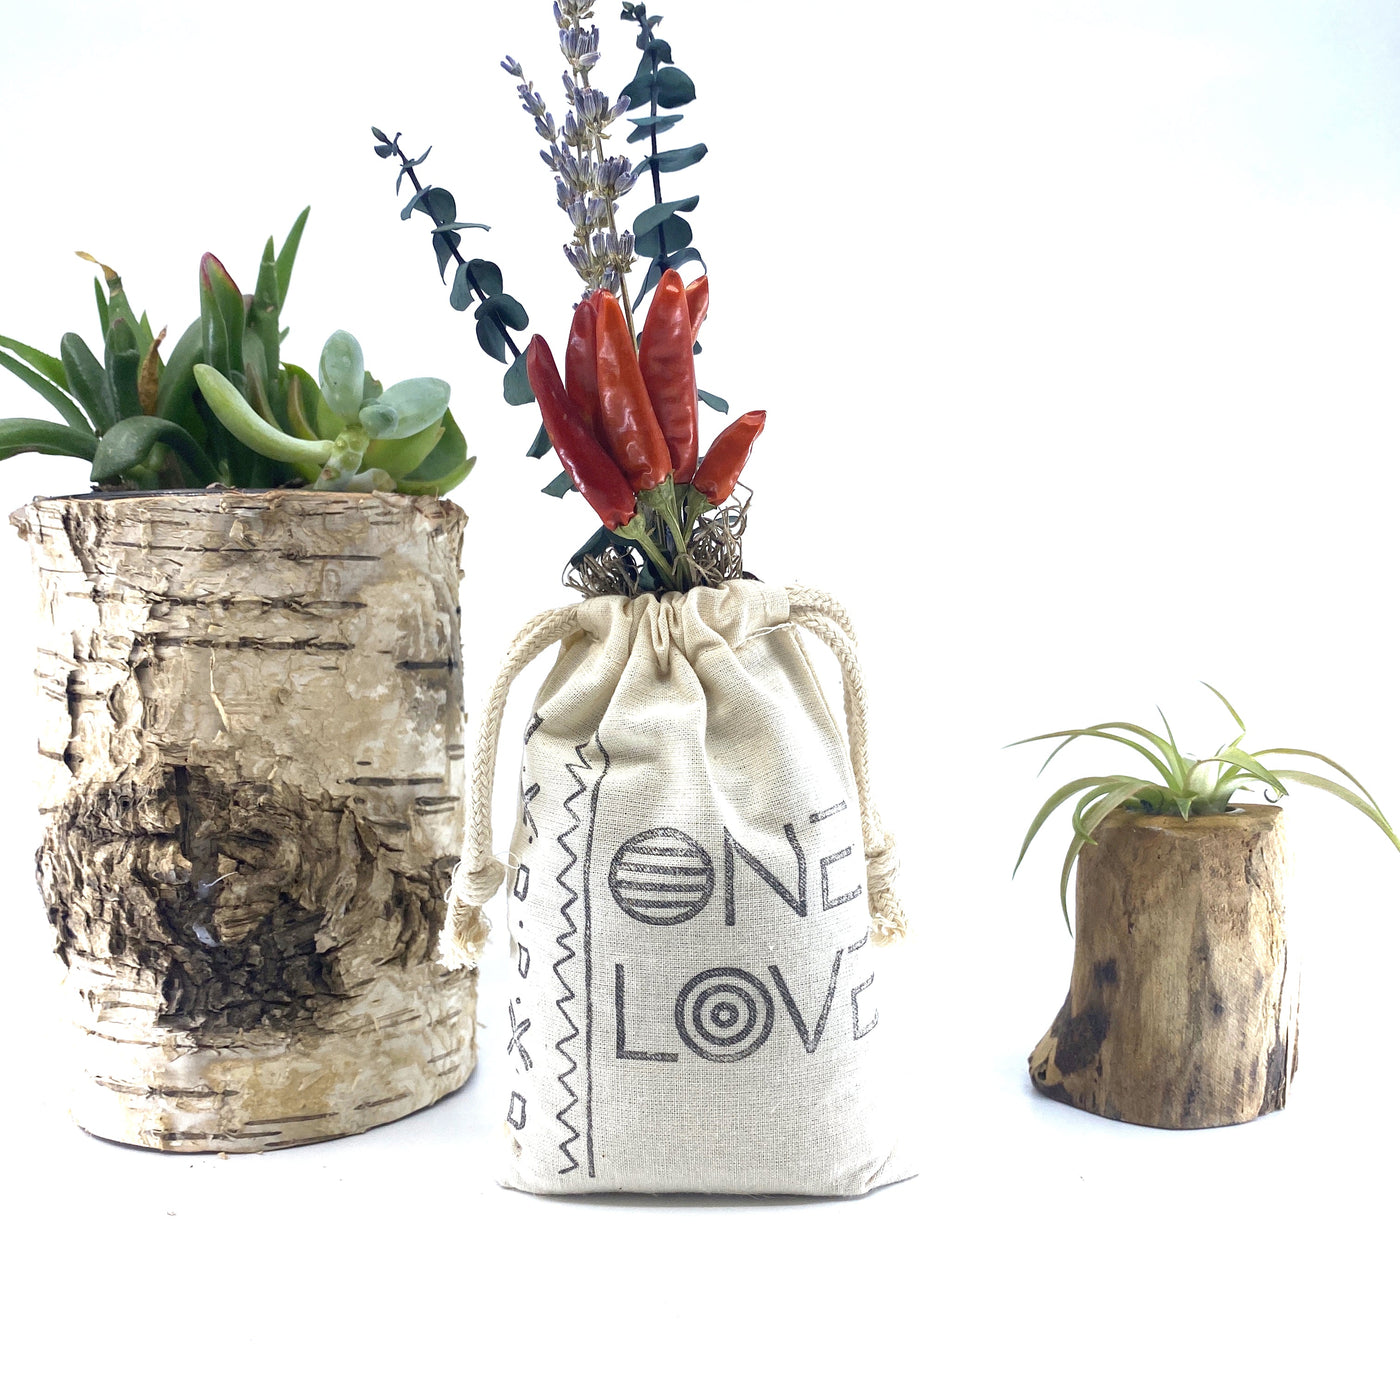 Sack of Flowers, One Love, Organic, Dried Flower Bouquet